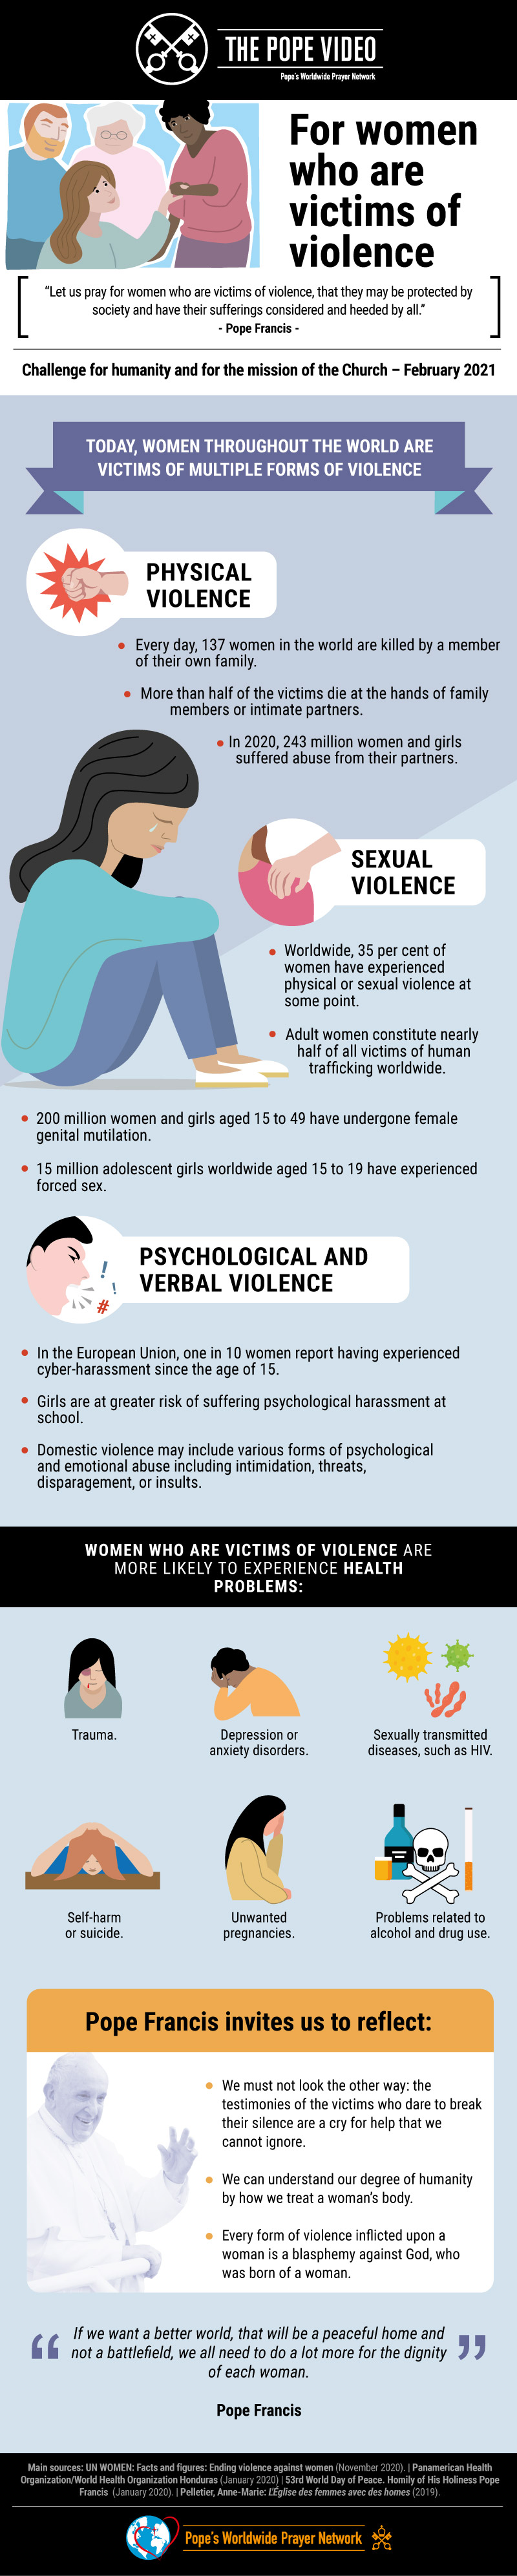 Infographic-TPV-2-2021-EN-The-Pope-Video-For-women-who-are-victims-of-violence.jpg